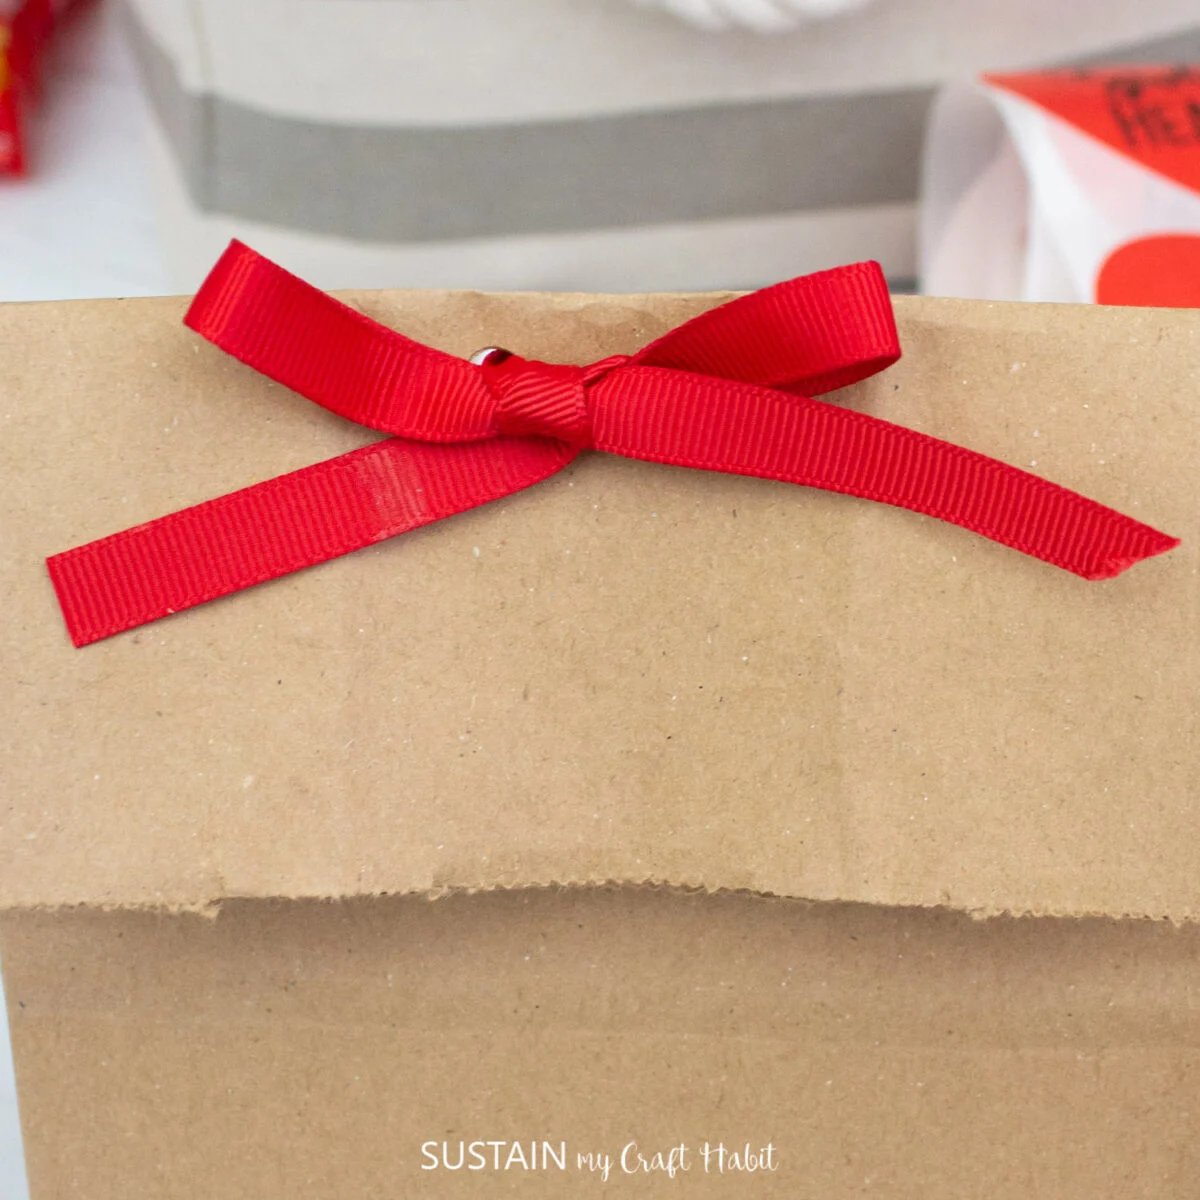 Attaching a red ribbon to the top of a paper bag.